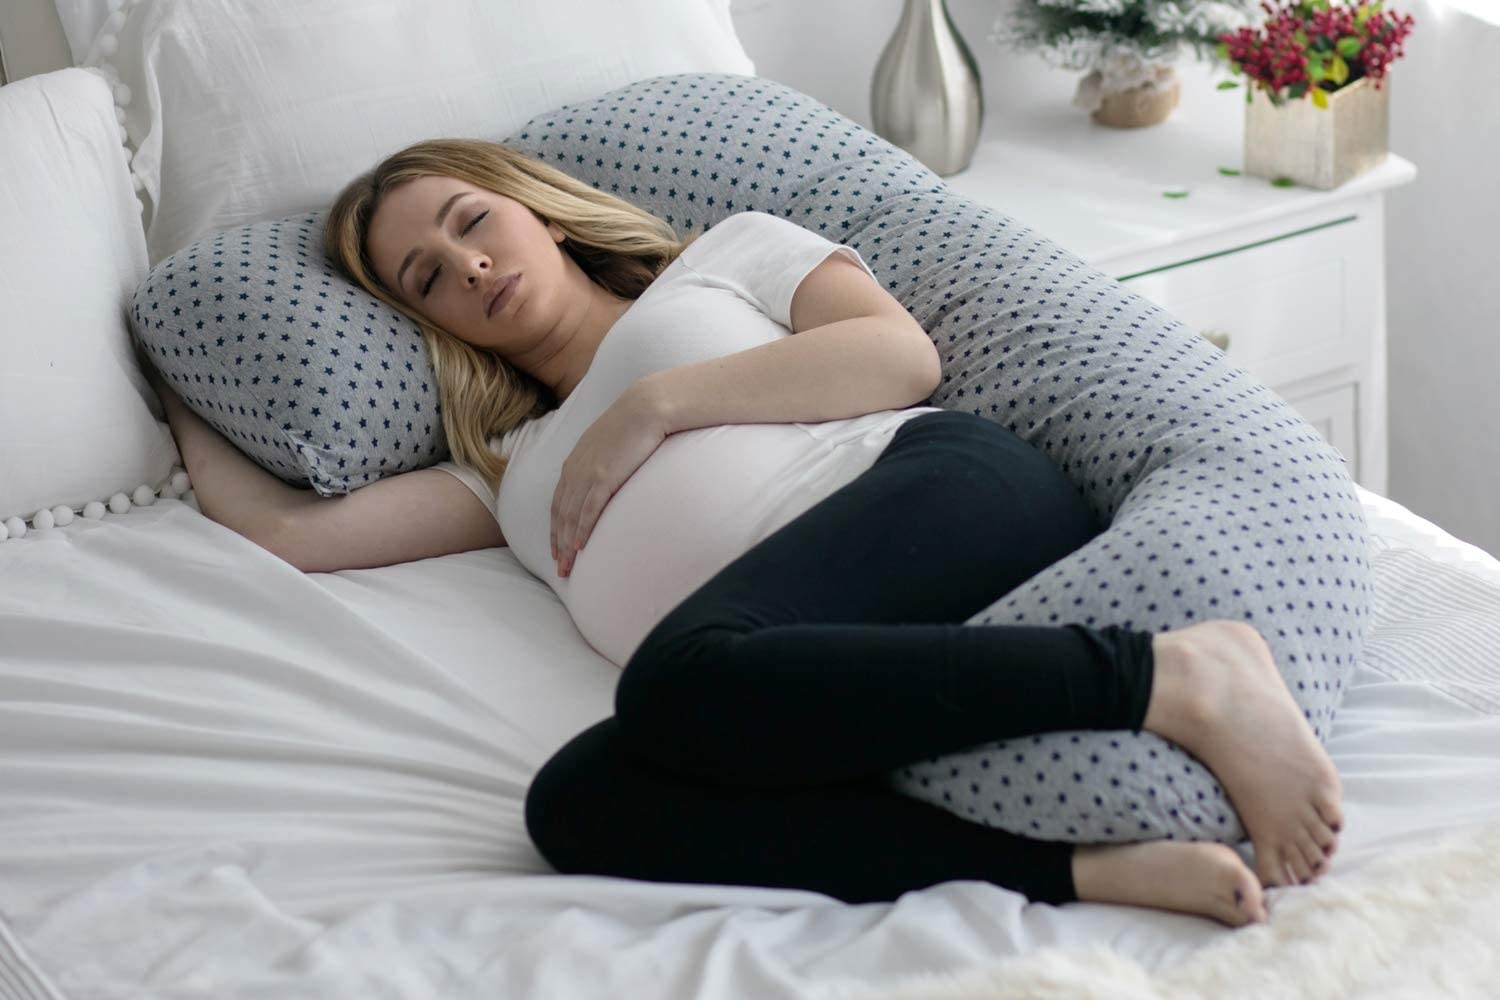 pregnant model with a C-shaped pillow supporting their back, neck, and legs